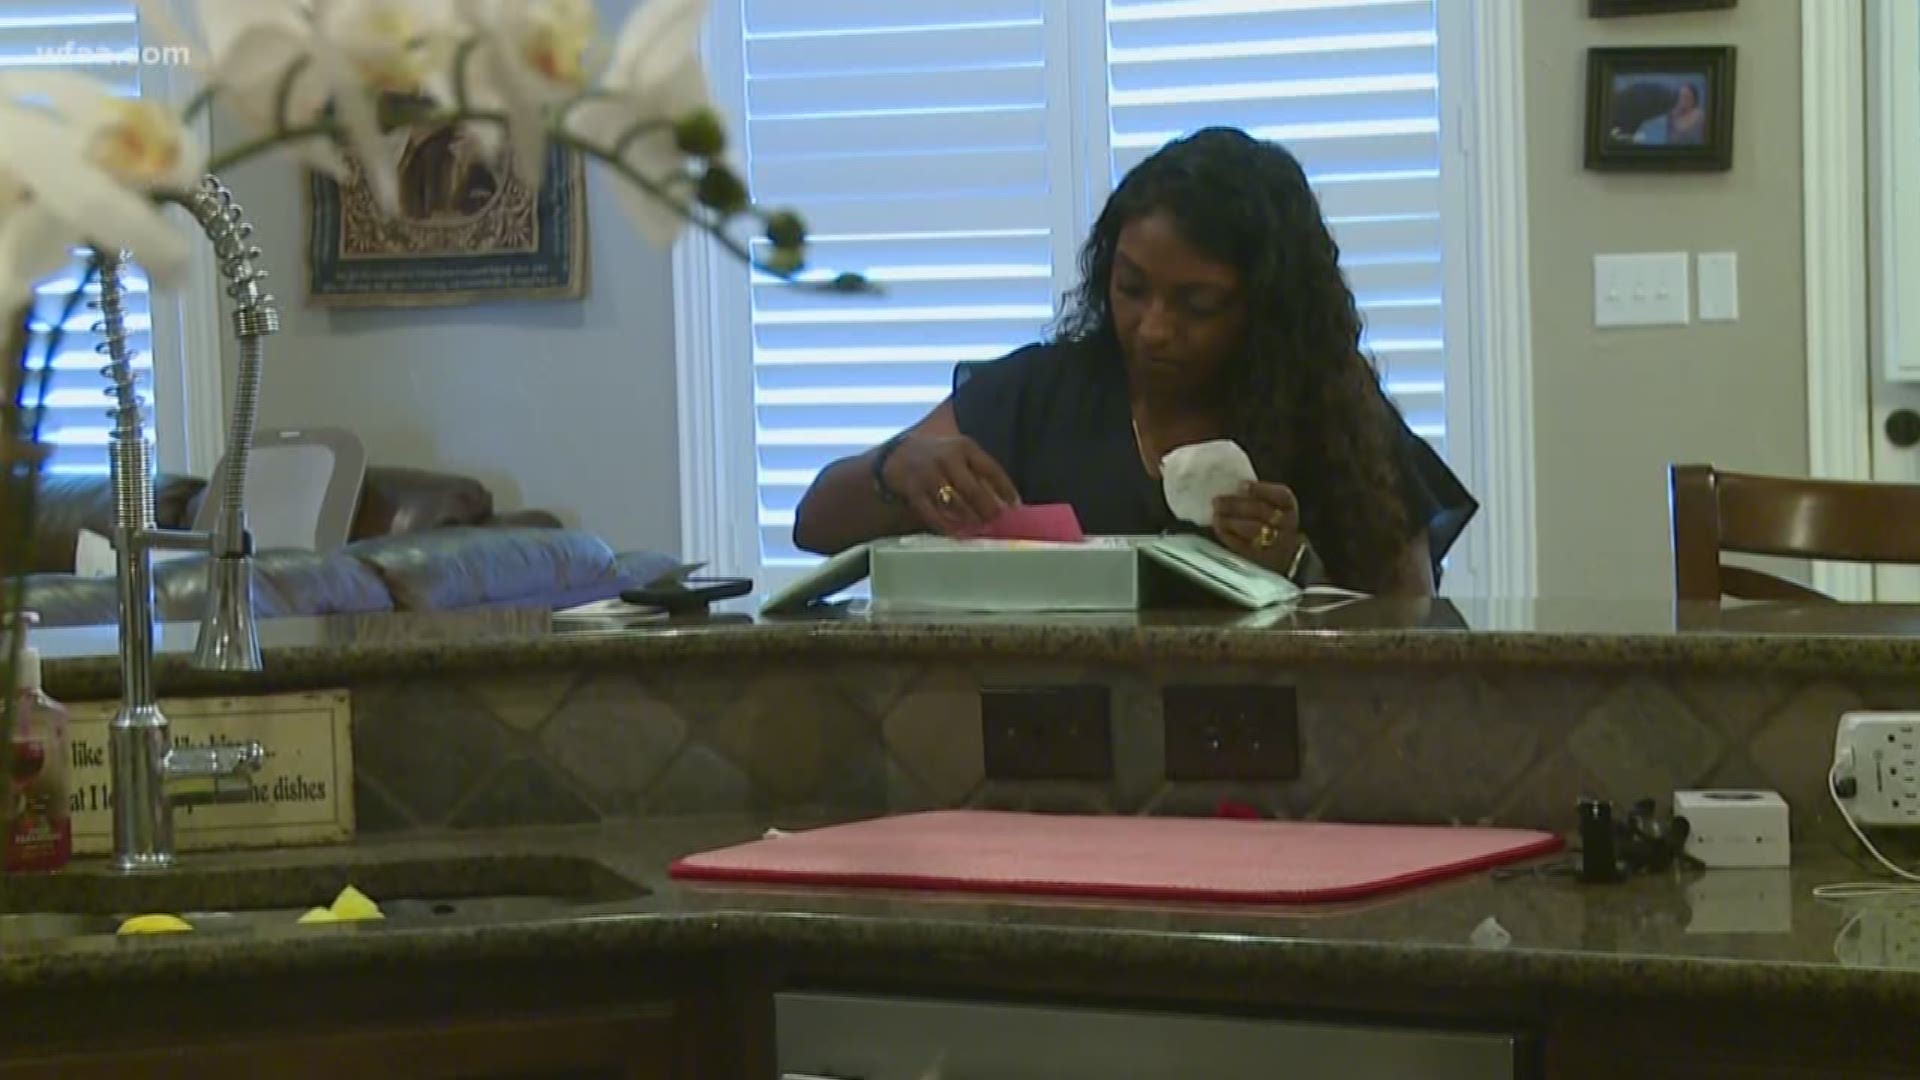 Dallas area mom shares story, finds unexpected closure